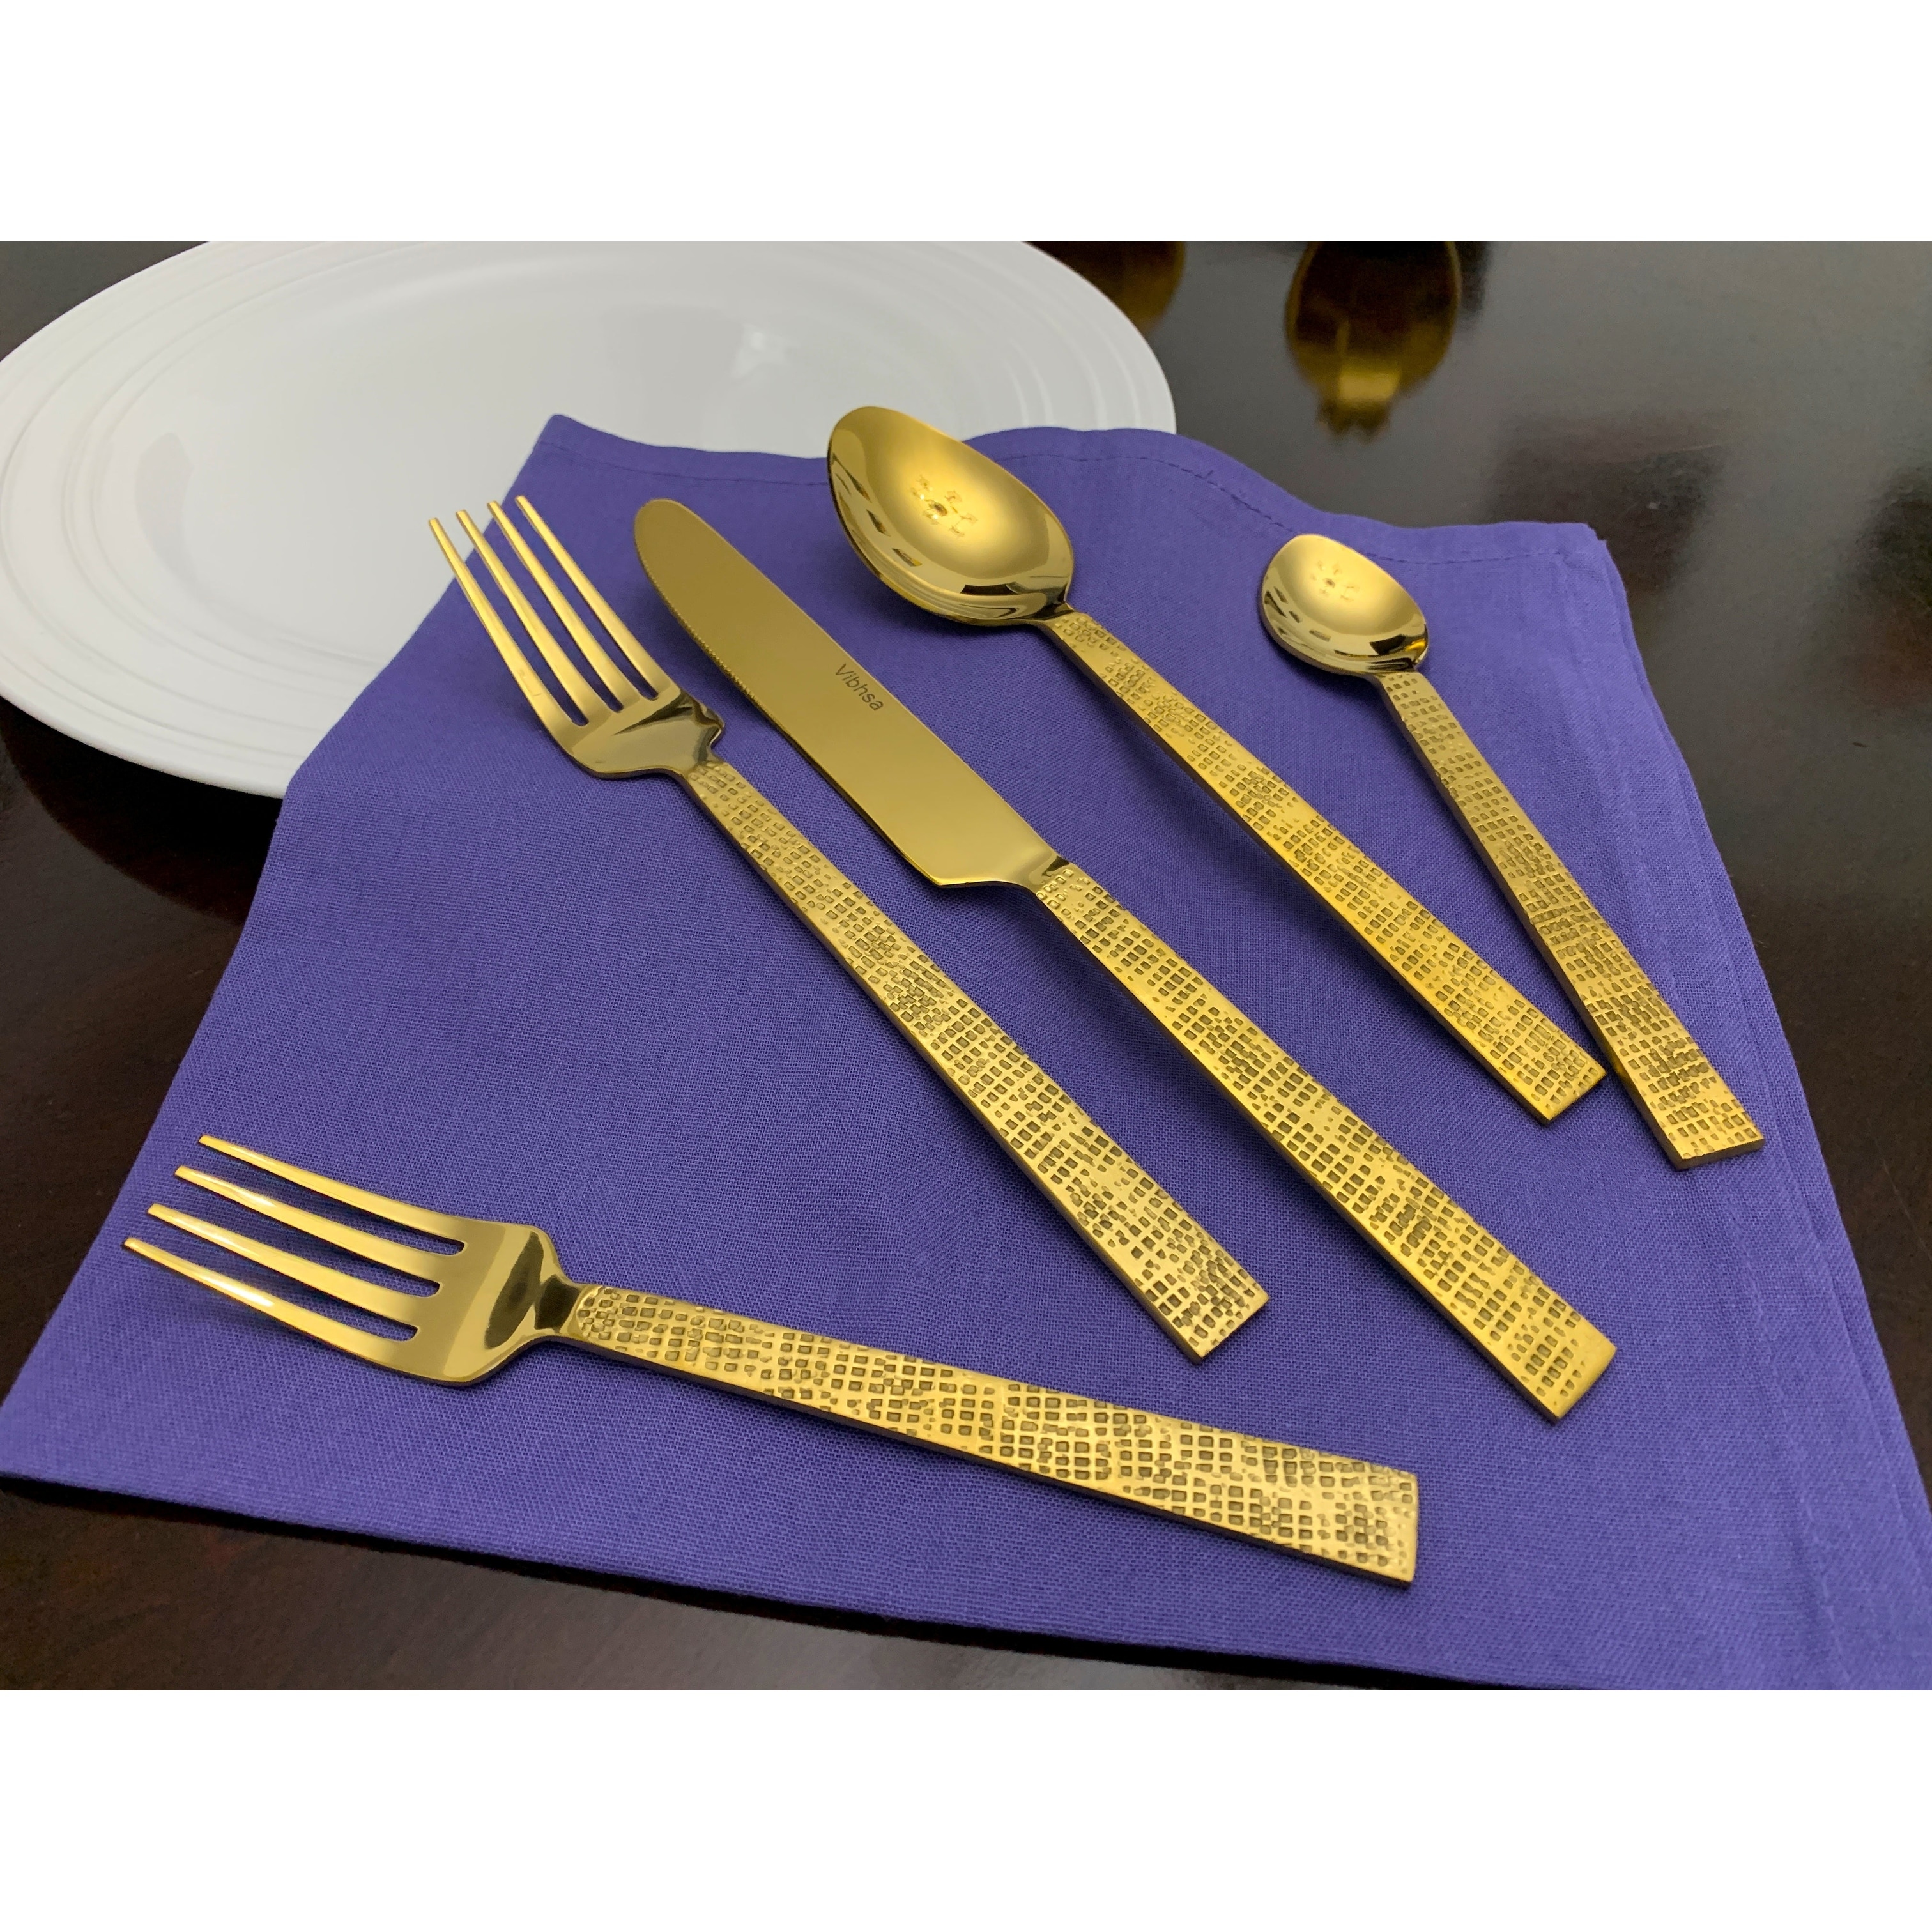 Vibhsa Rustic Golden Stainless Steel Flatware Set of 20 PC